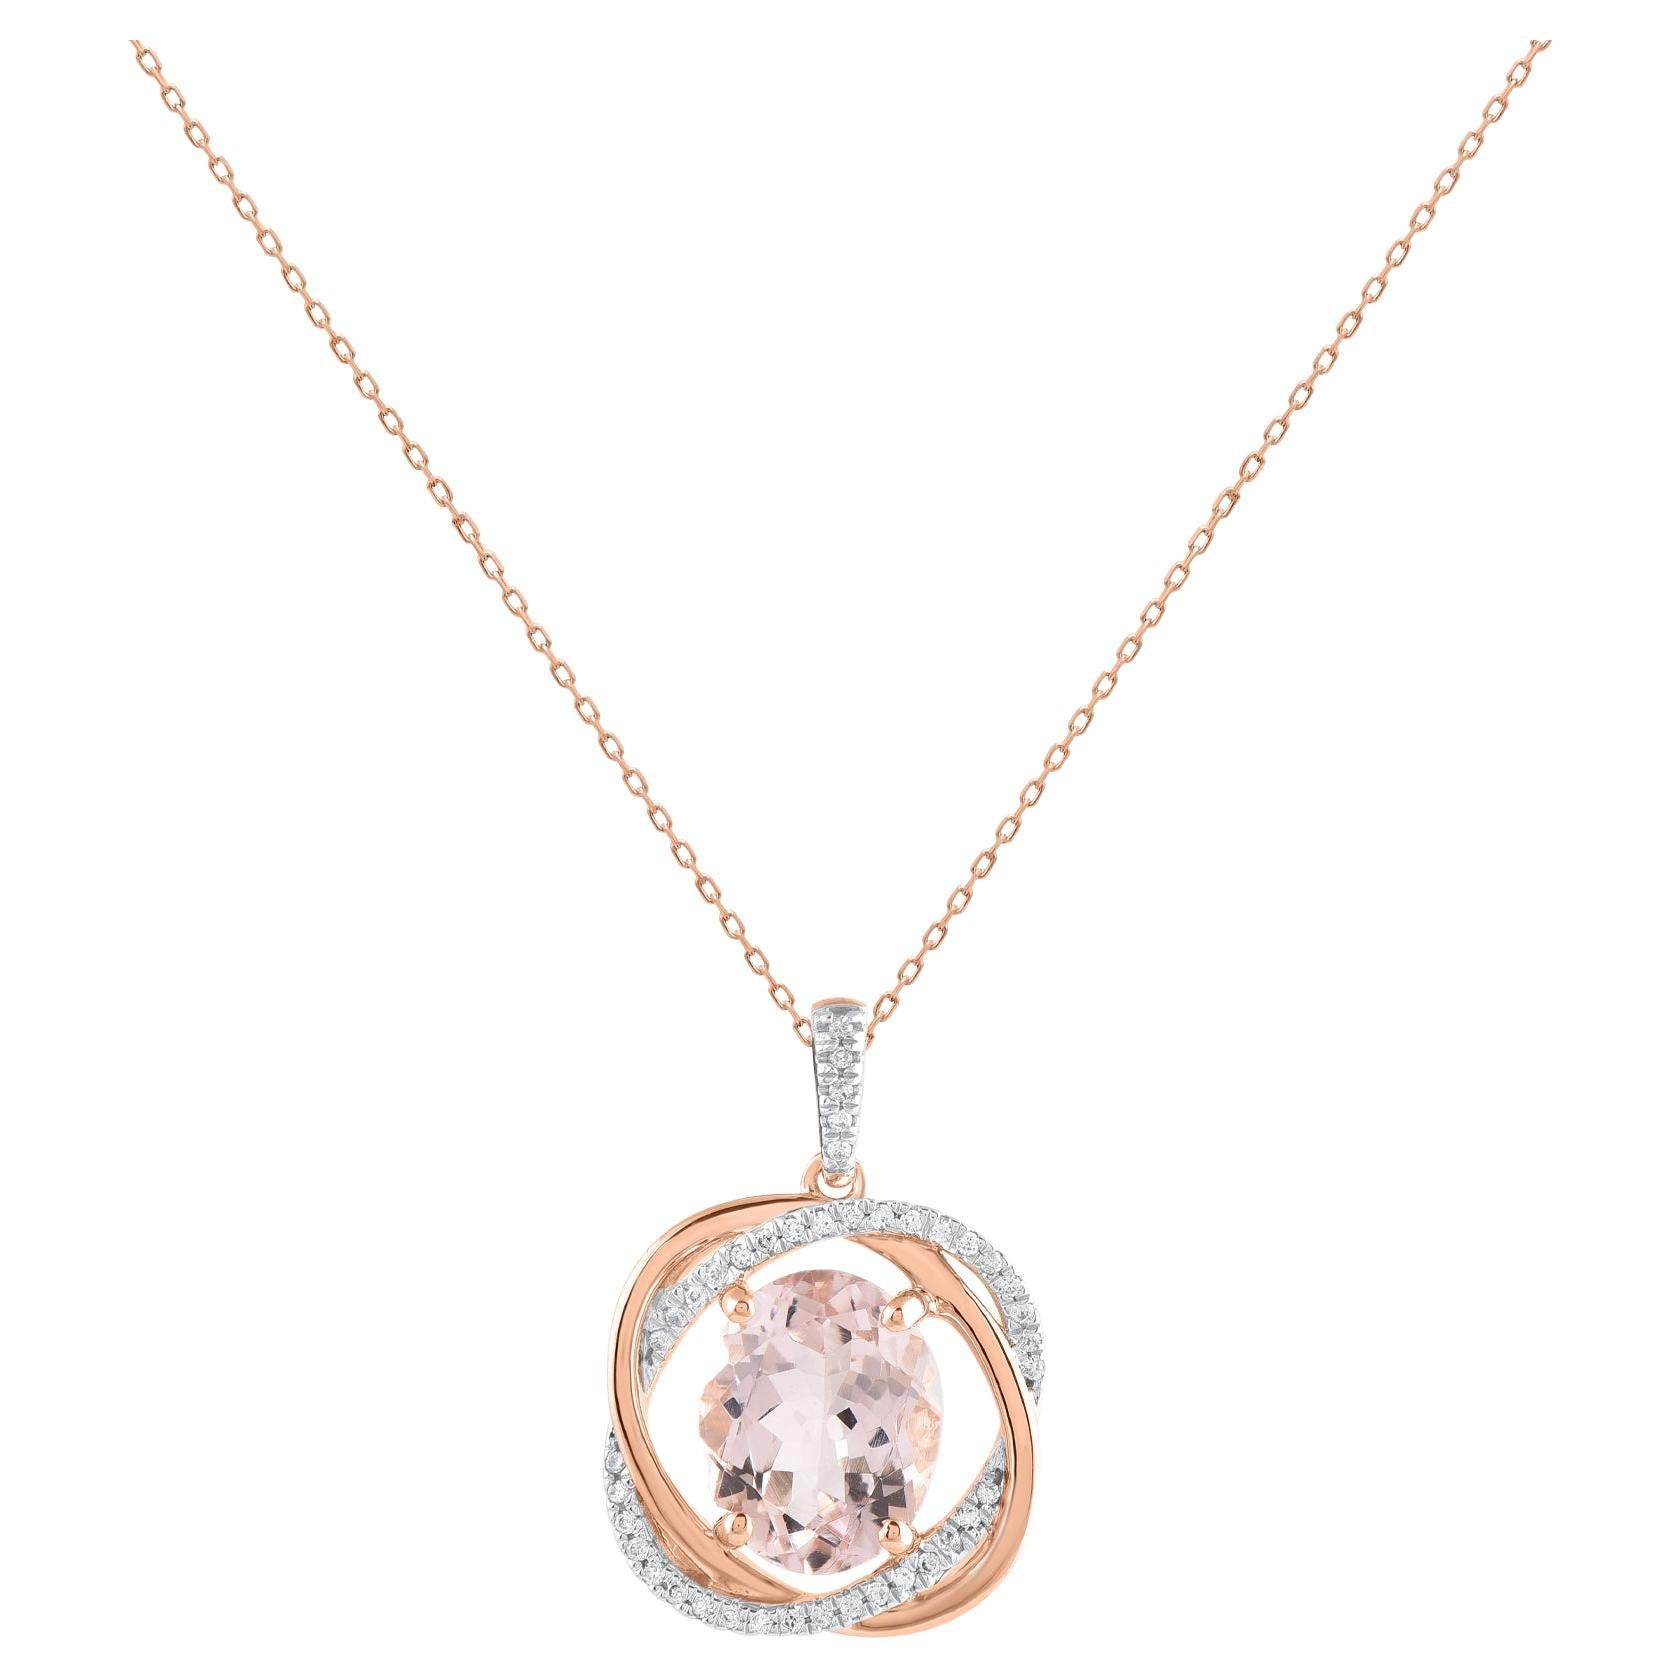 TJD 0.12 Ct Diamond and 2 Ct Oval Morganite Pendant Necklace in 14KT Rose Gold For Sale